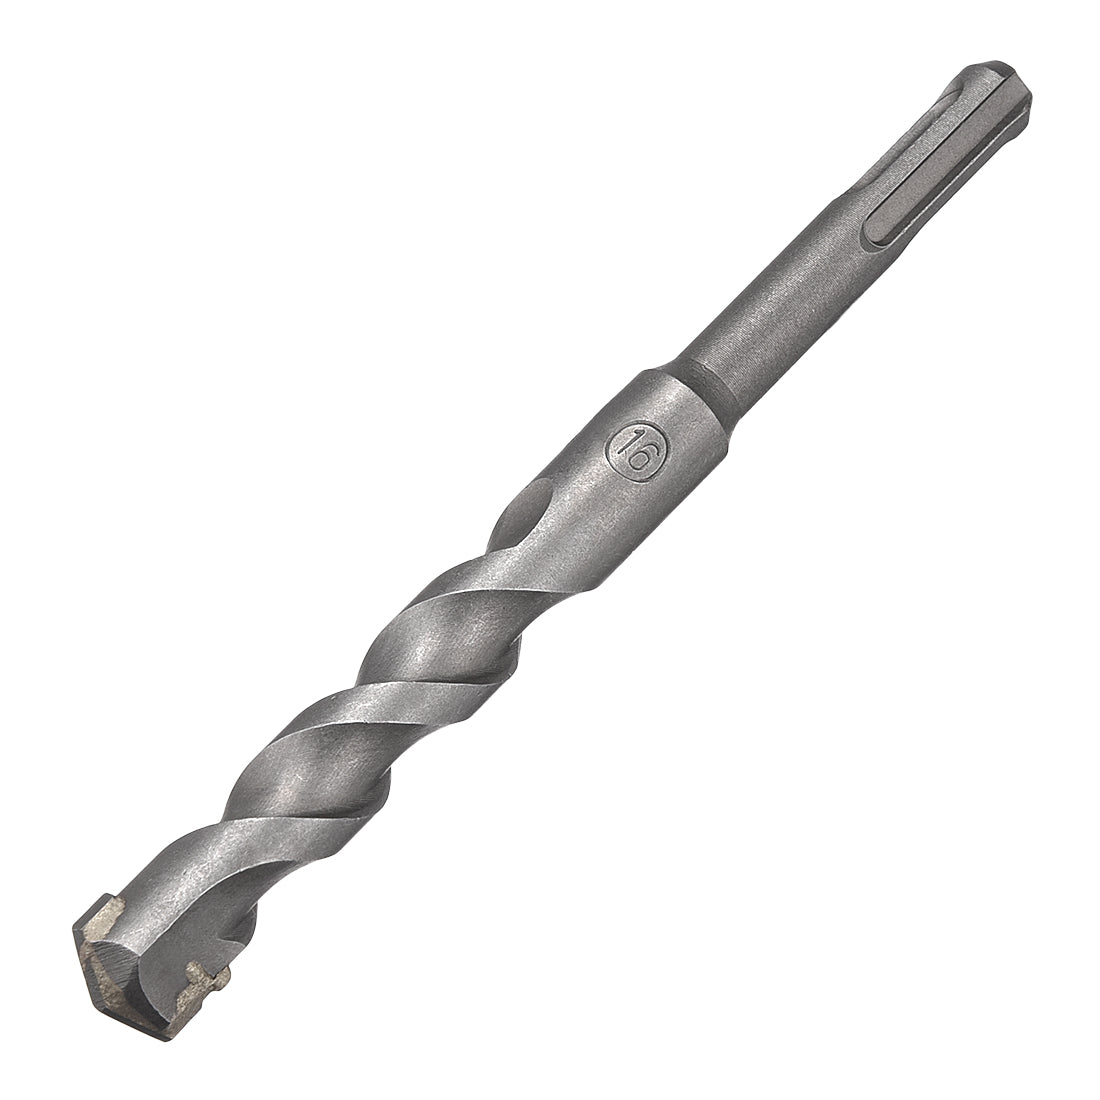 uxcell Uxcell Masonry Drill Bit 16mmx160mm 9mm Round Shank for Impact Drill